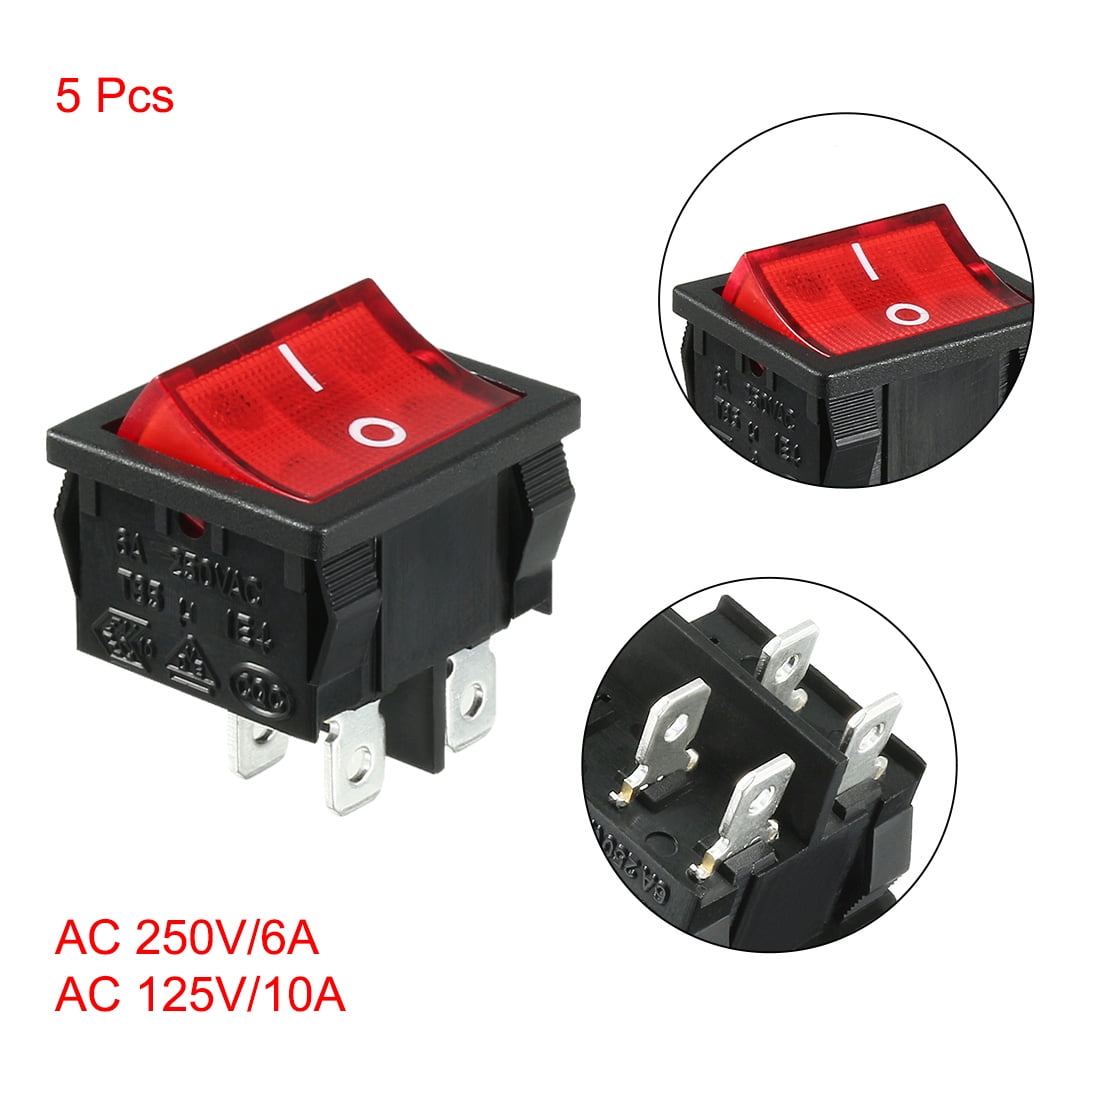 New Red AC250V/10A 125V/16A DPST 2 Position 4 Pin Waterproof Boat Rocker Switch 